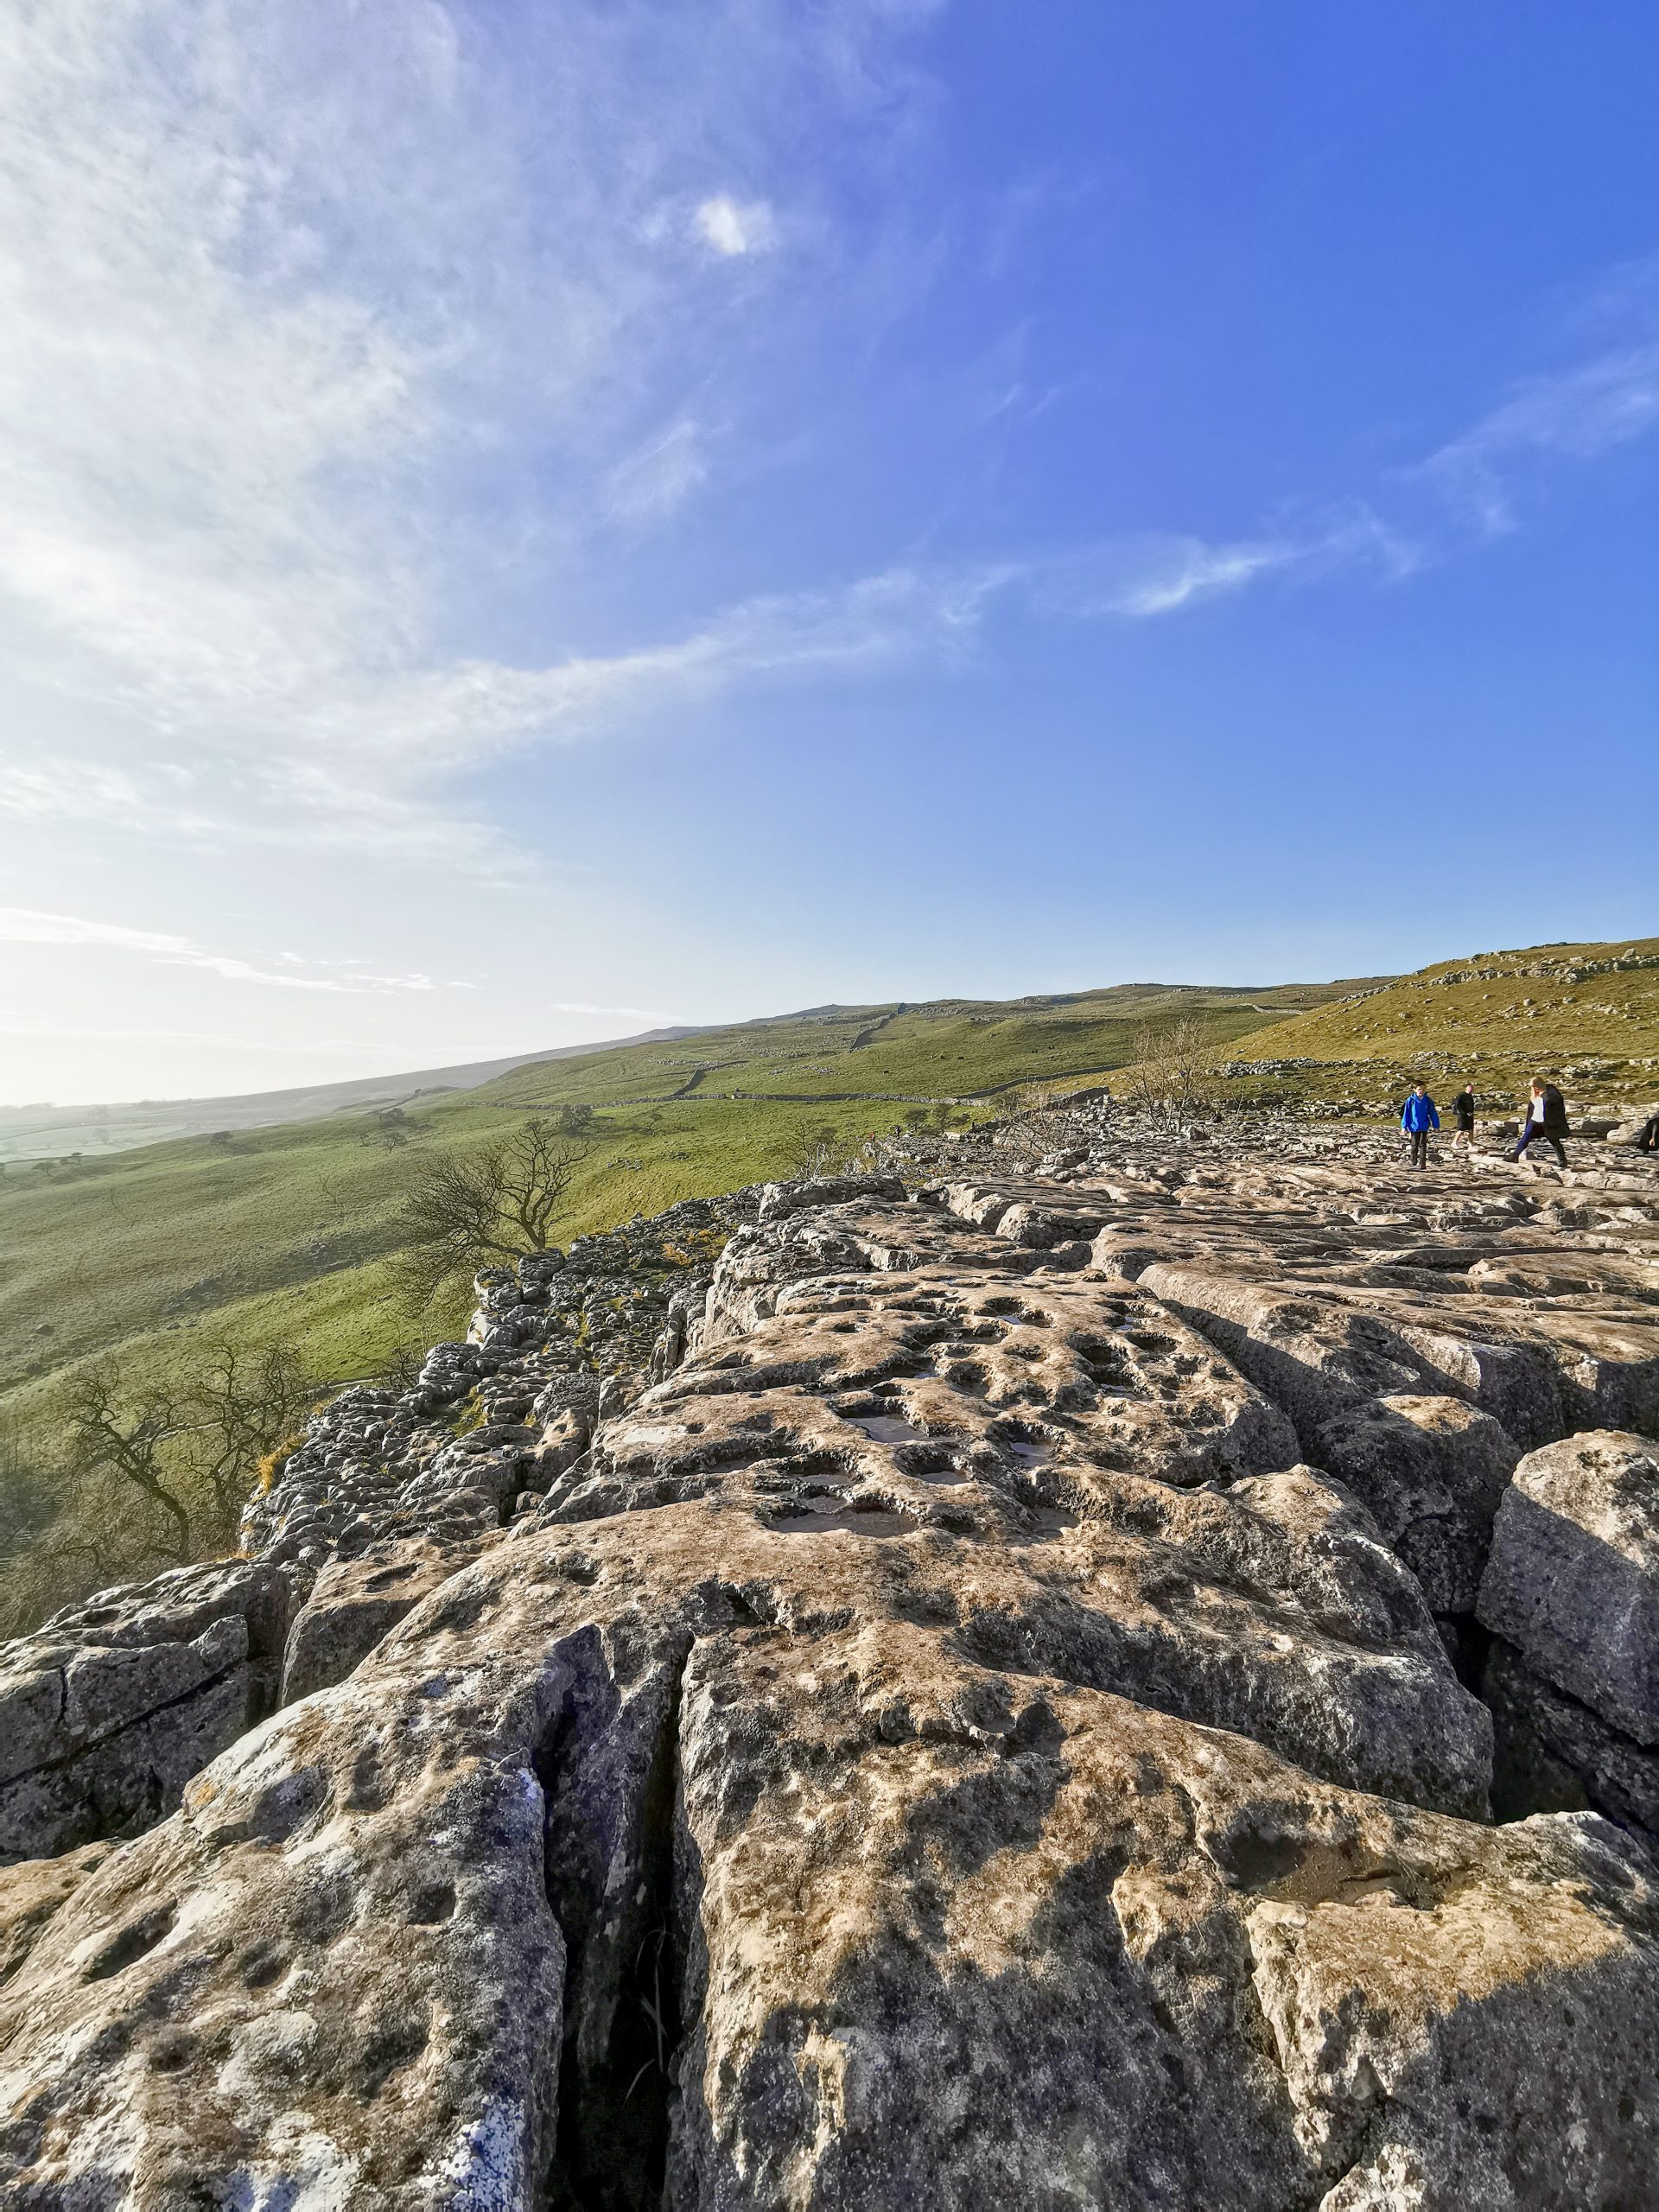 Malham Cove has been named a dog-friendly waterfall walk. Credit: The Manc Group